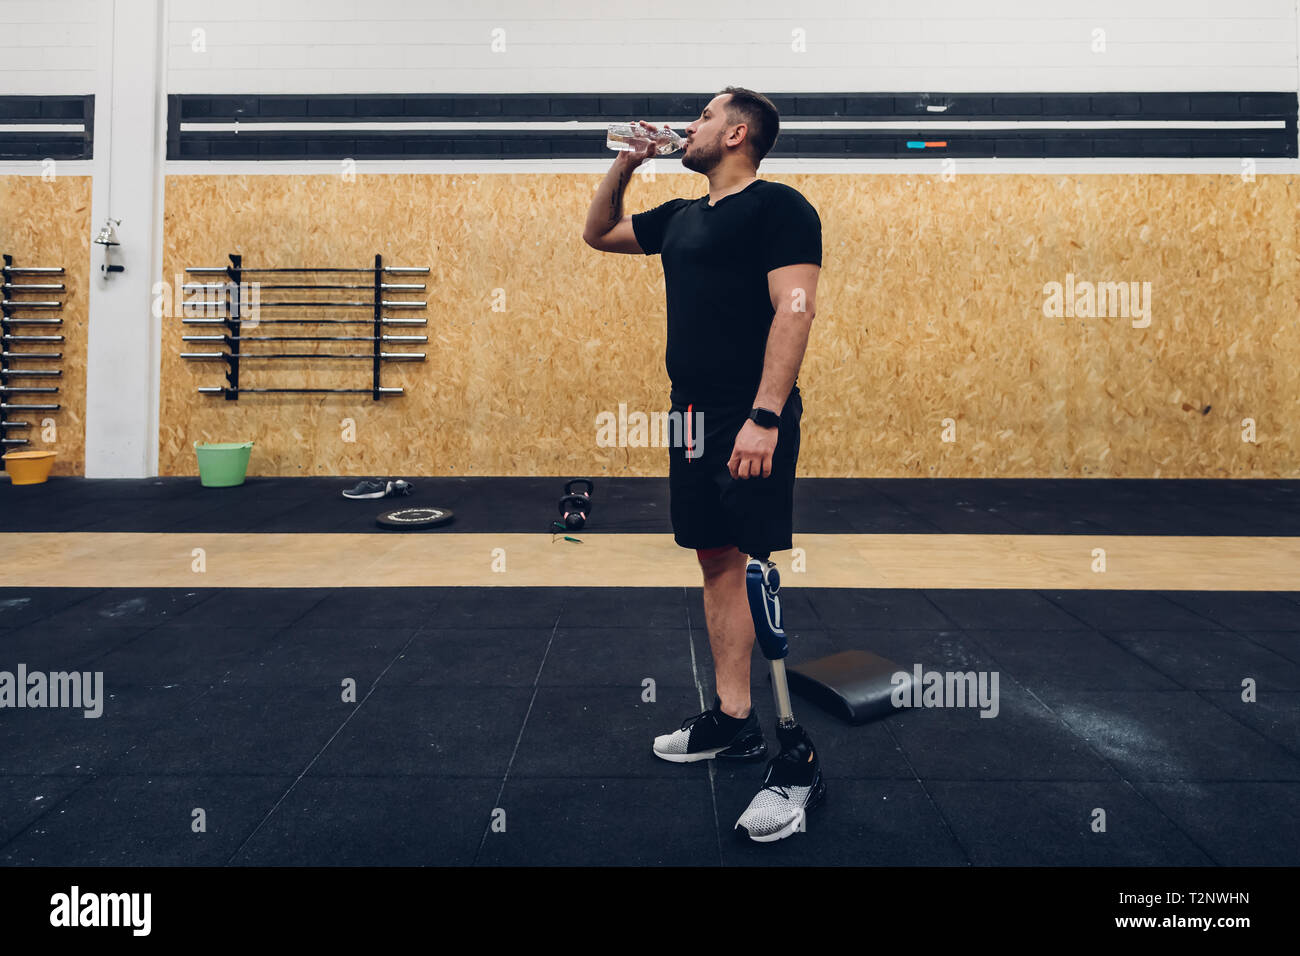 Man with prosthetic leg drinking water in gym Stock Photo